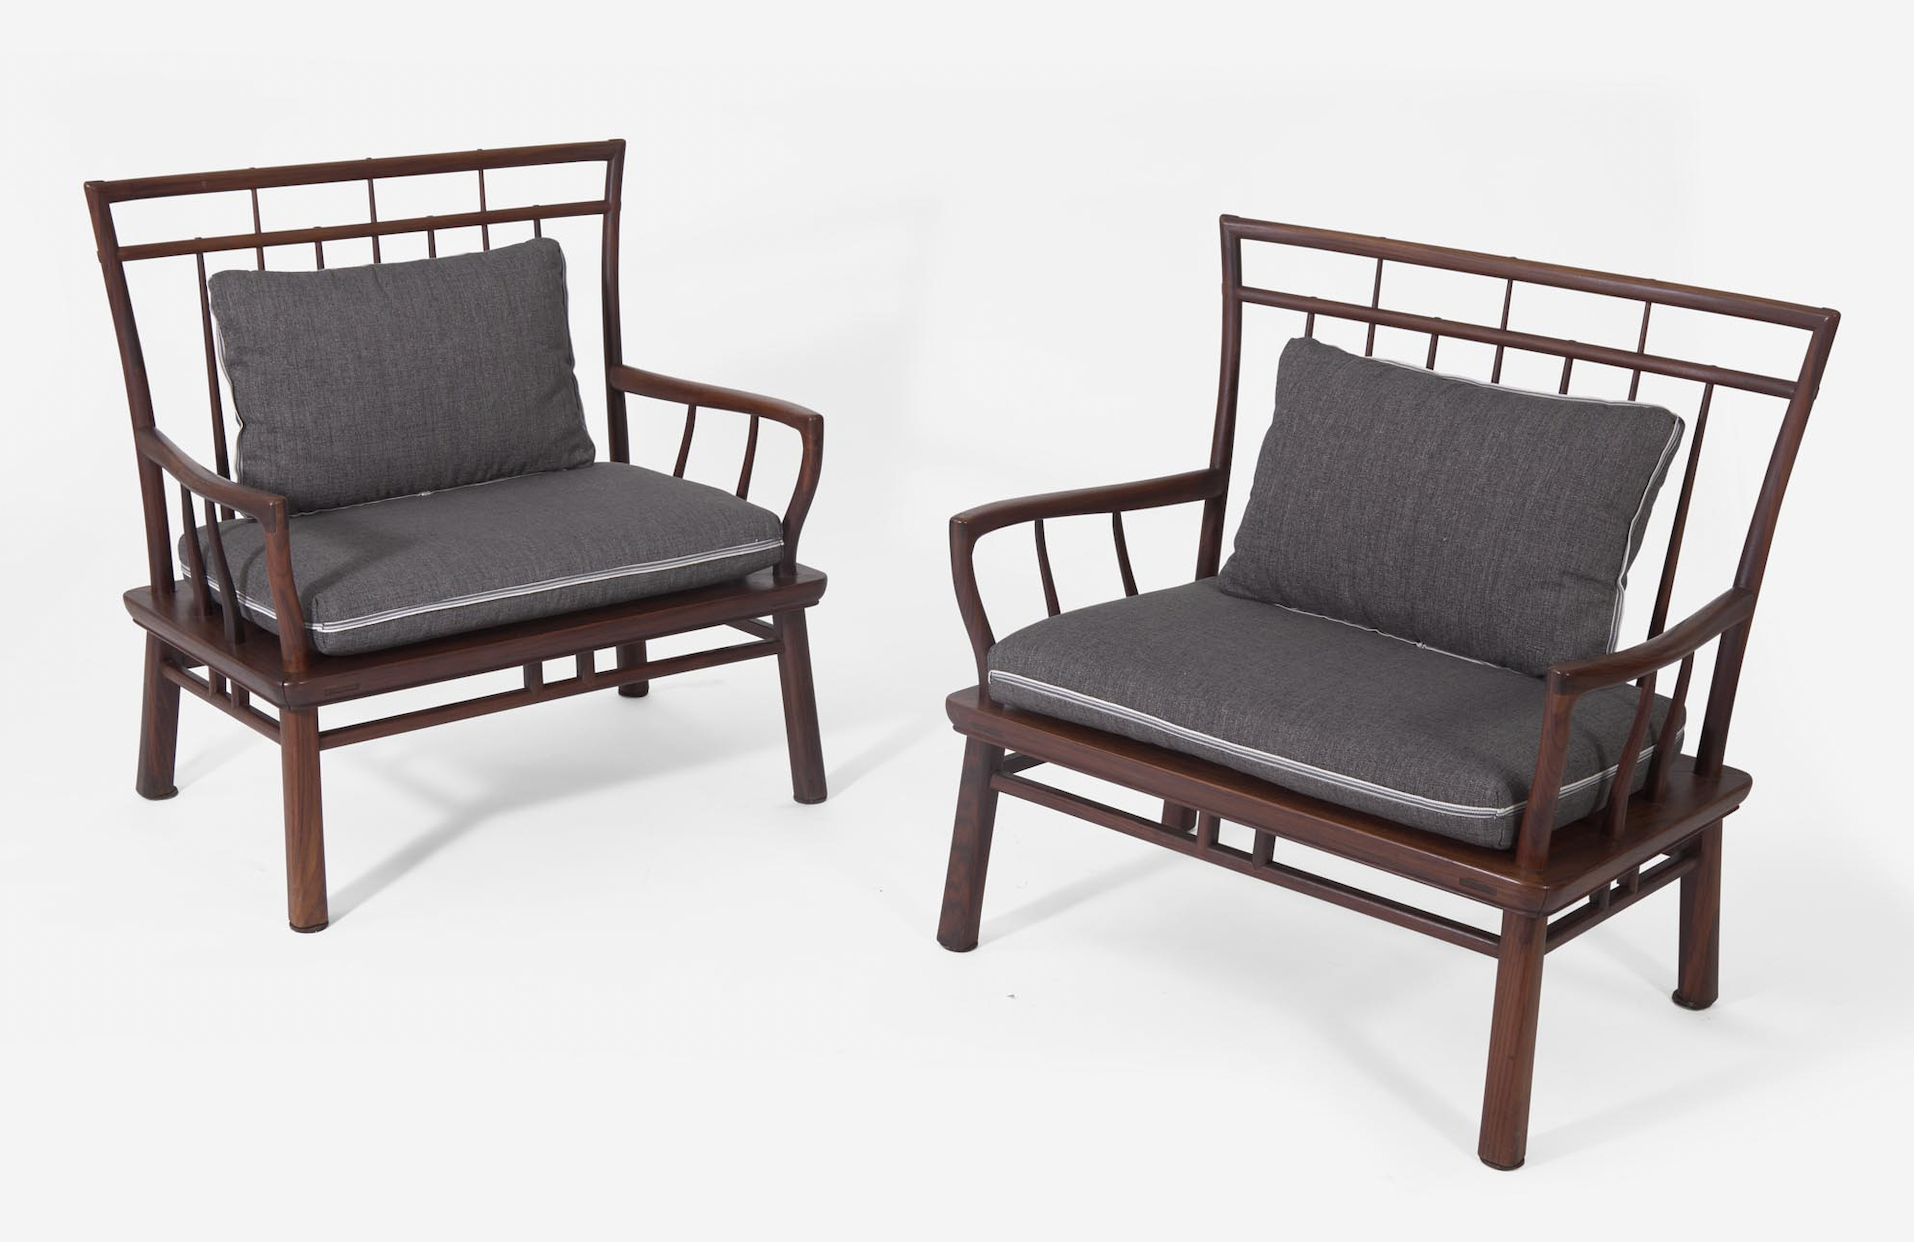  Pair of Chinese-style oversize armchairs or benches by Richard Koga, estimated at $4,000-$6,000